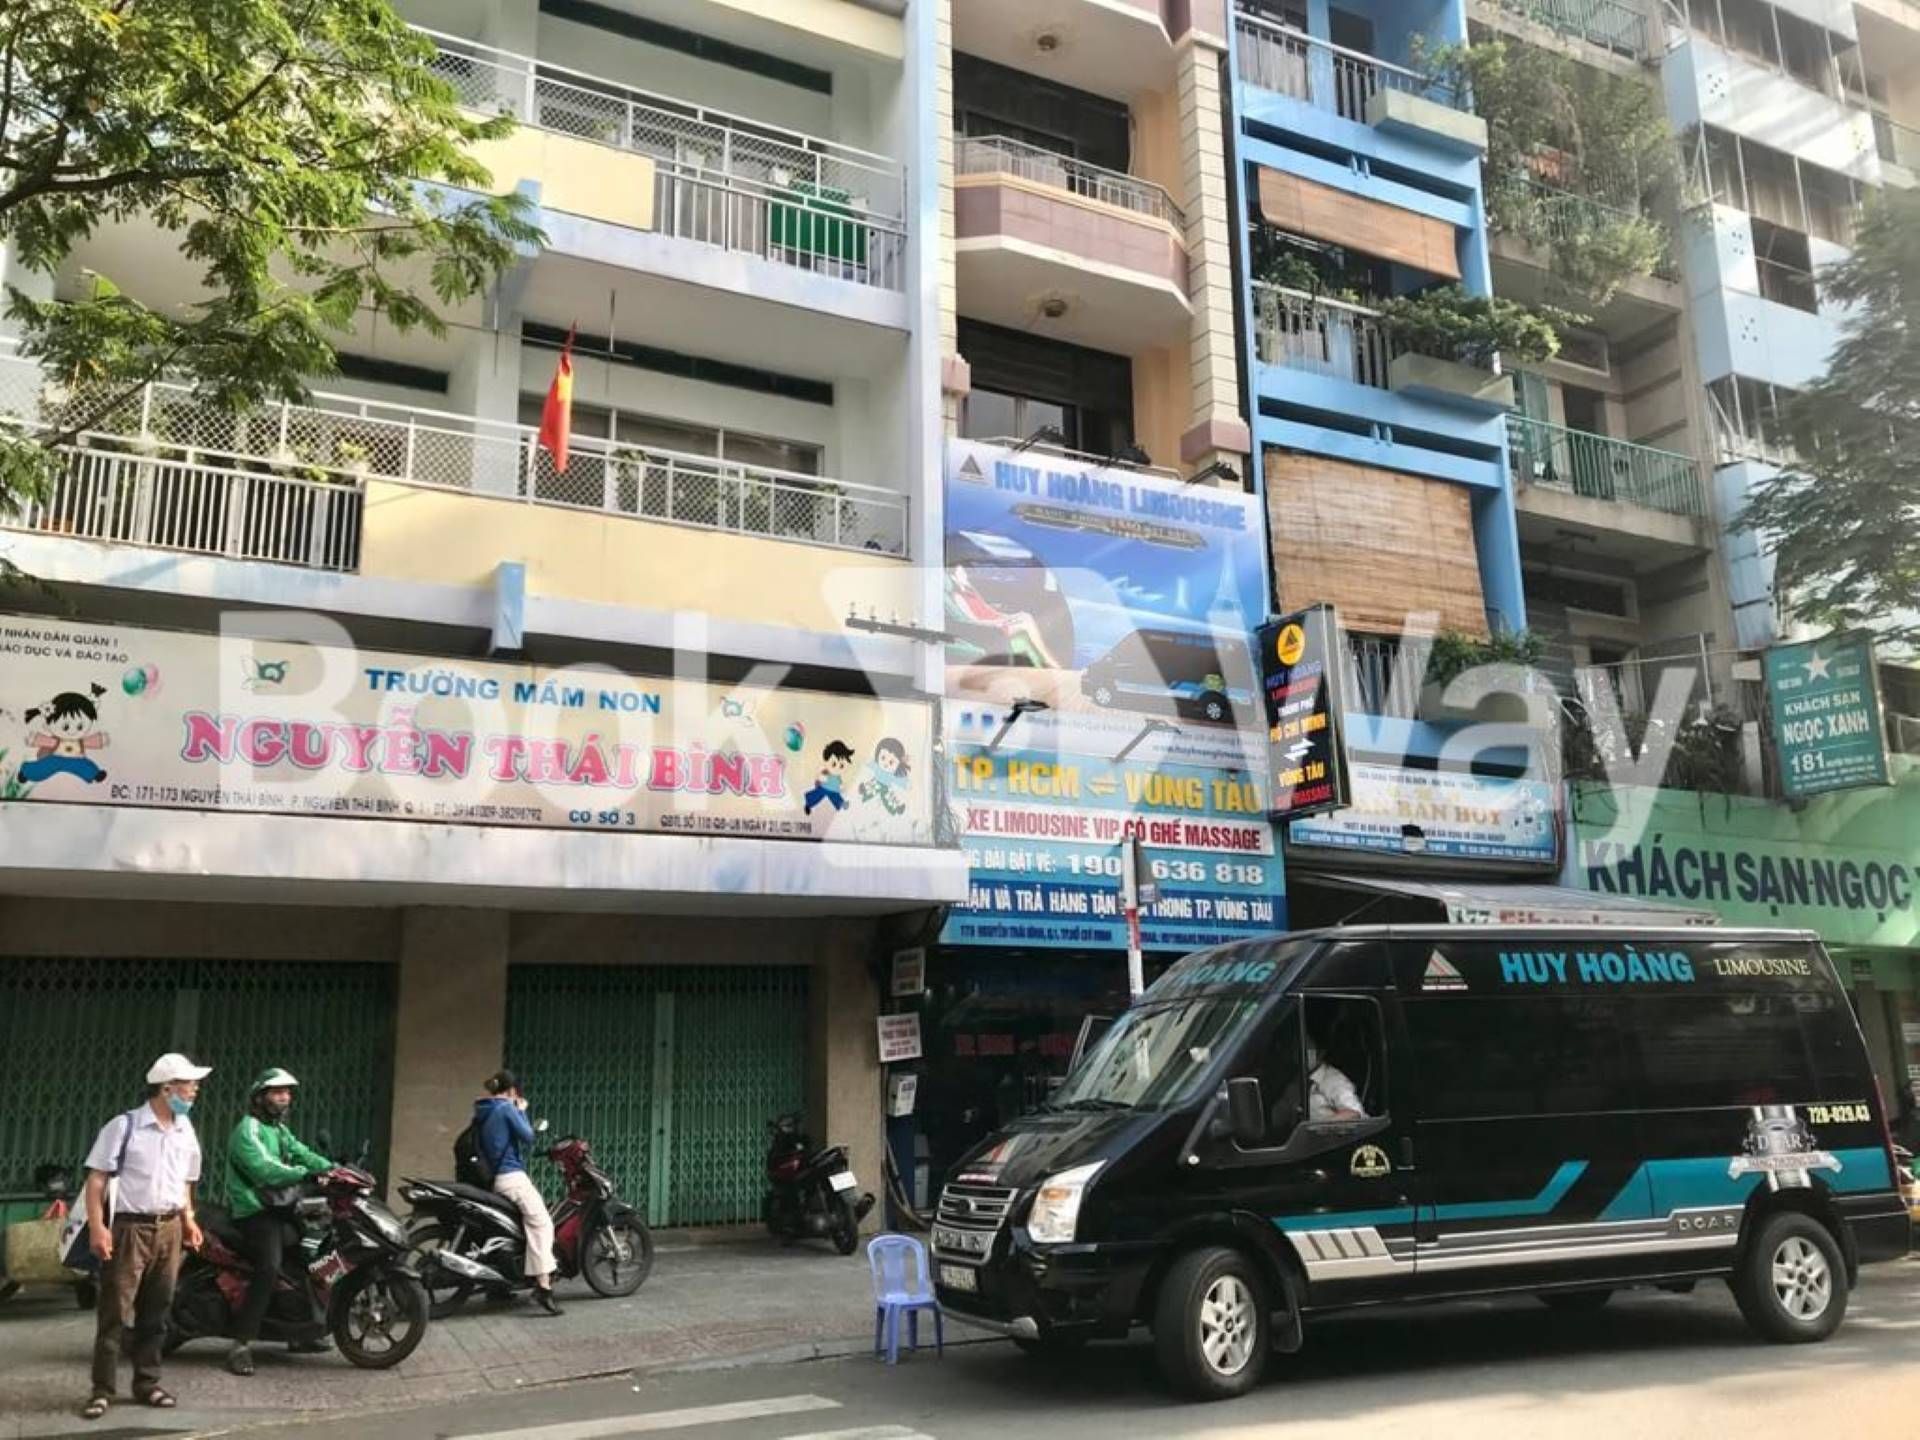 Huy Hoang Limousine office, District 1